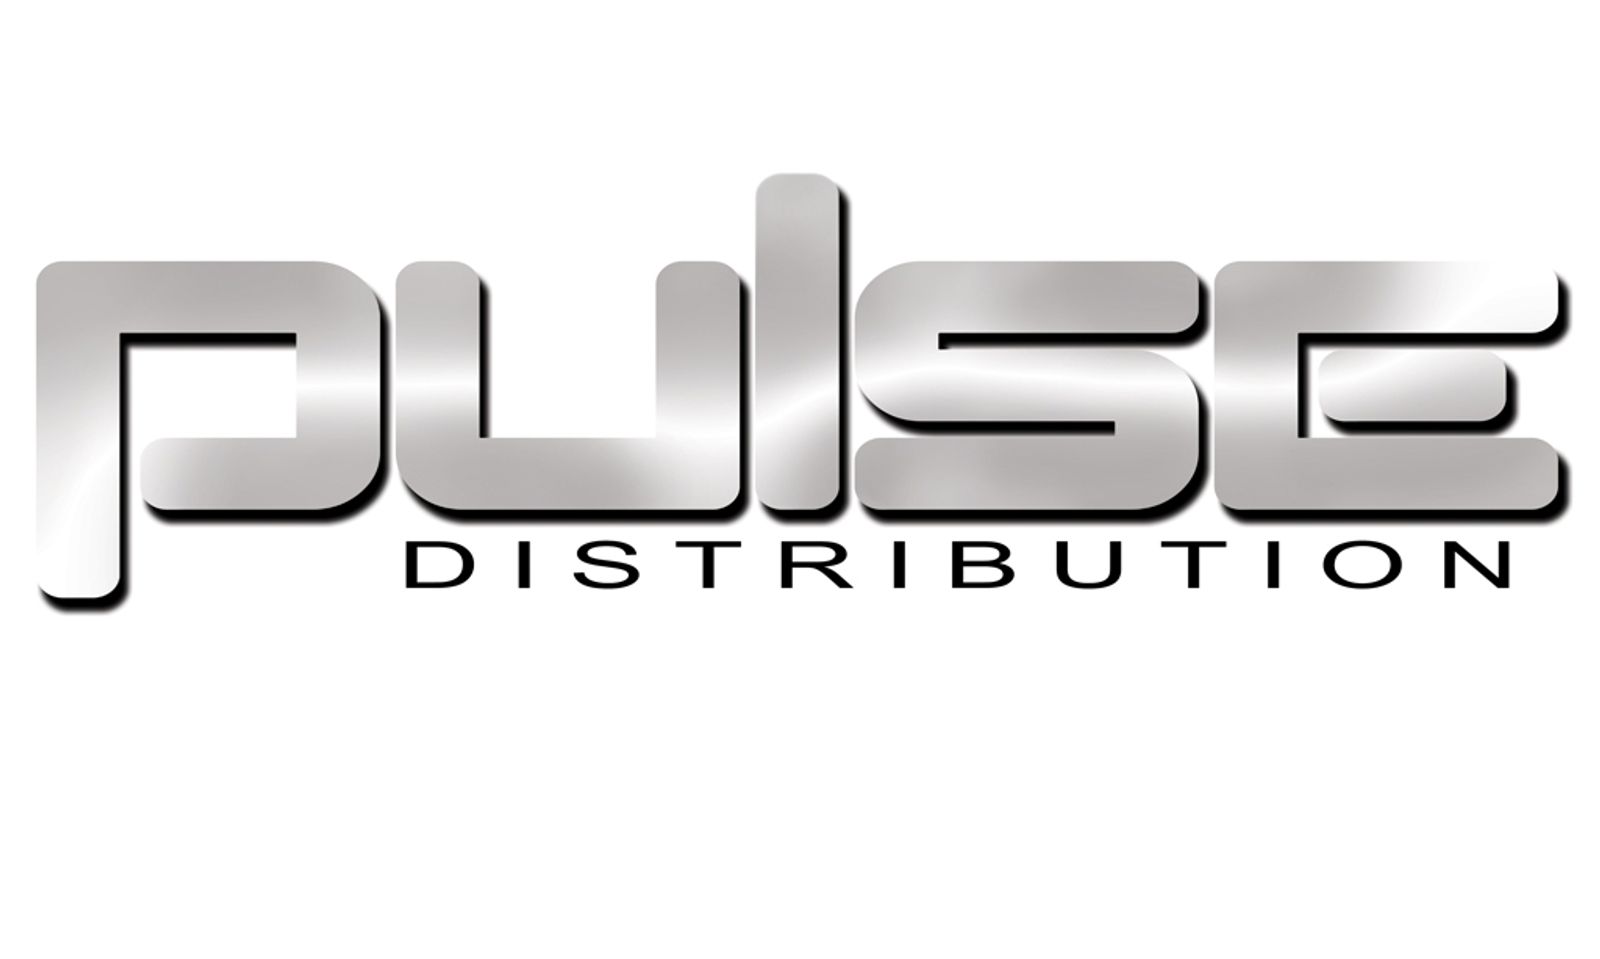 Dragon Media Signs Deal With Pulse Distribution